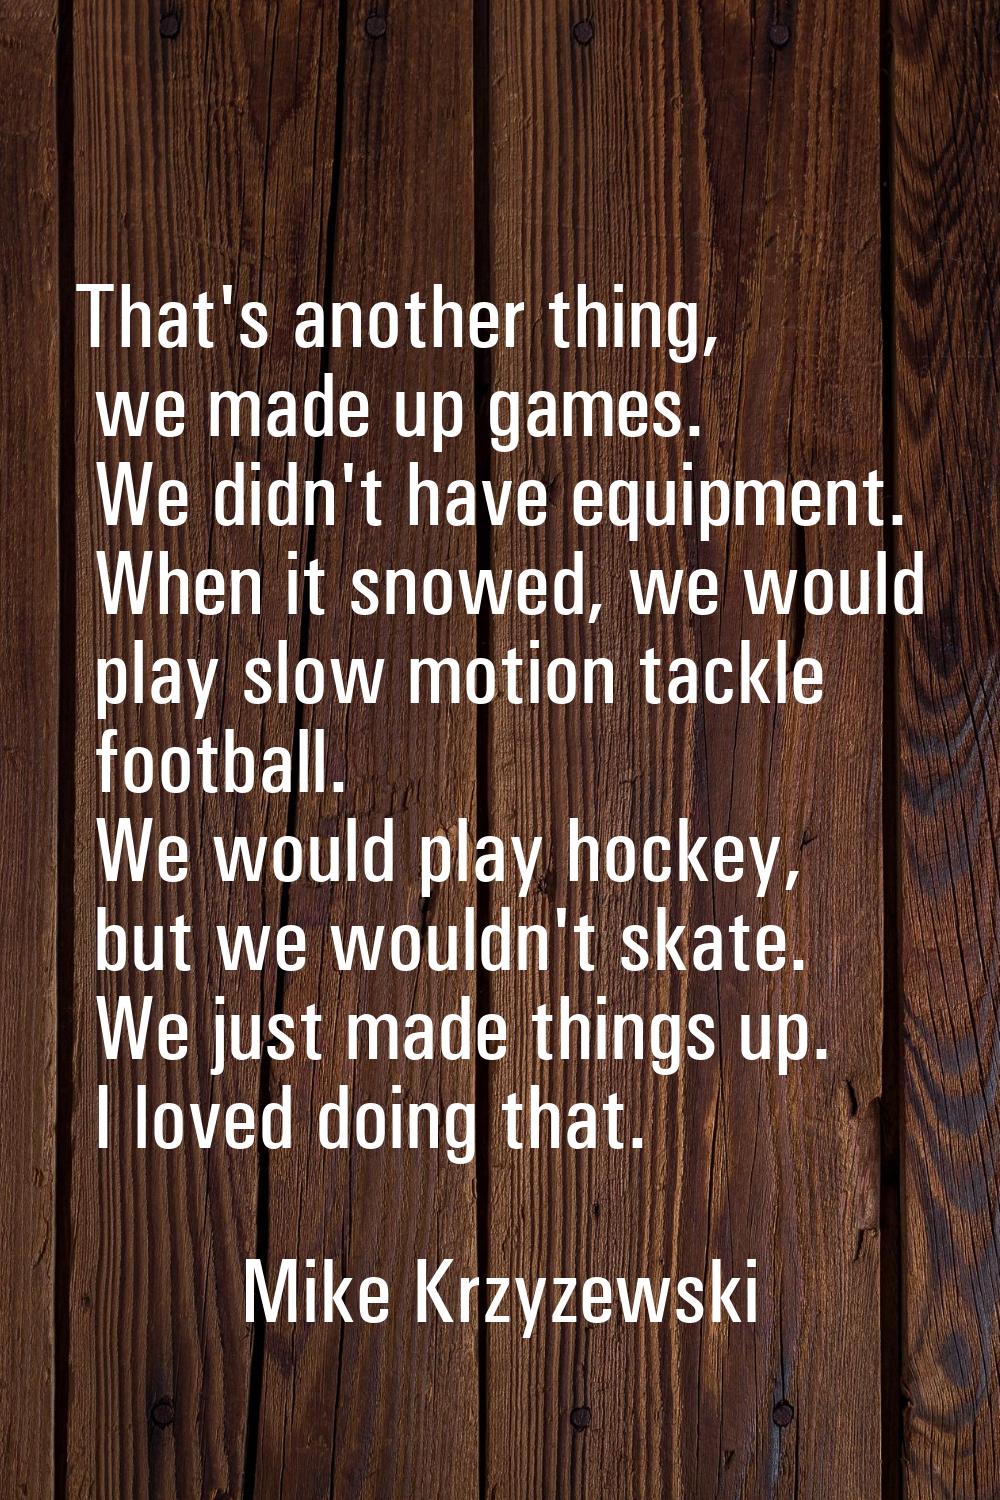 That's another thing, we made up games. We didn't have equipment. When it snowed, we would play slo